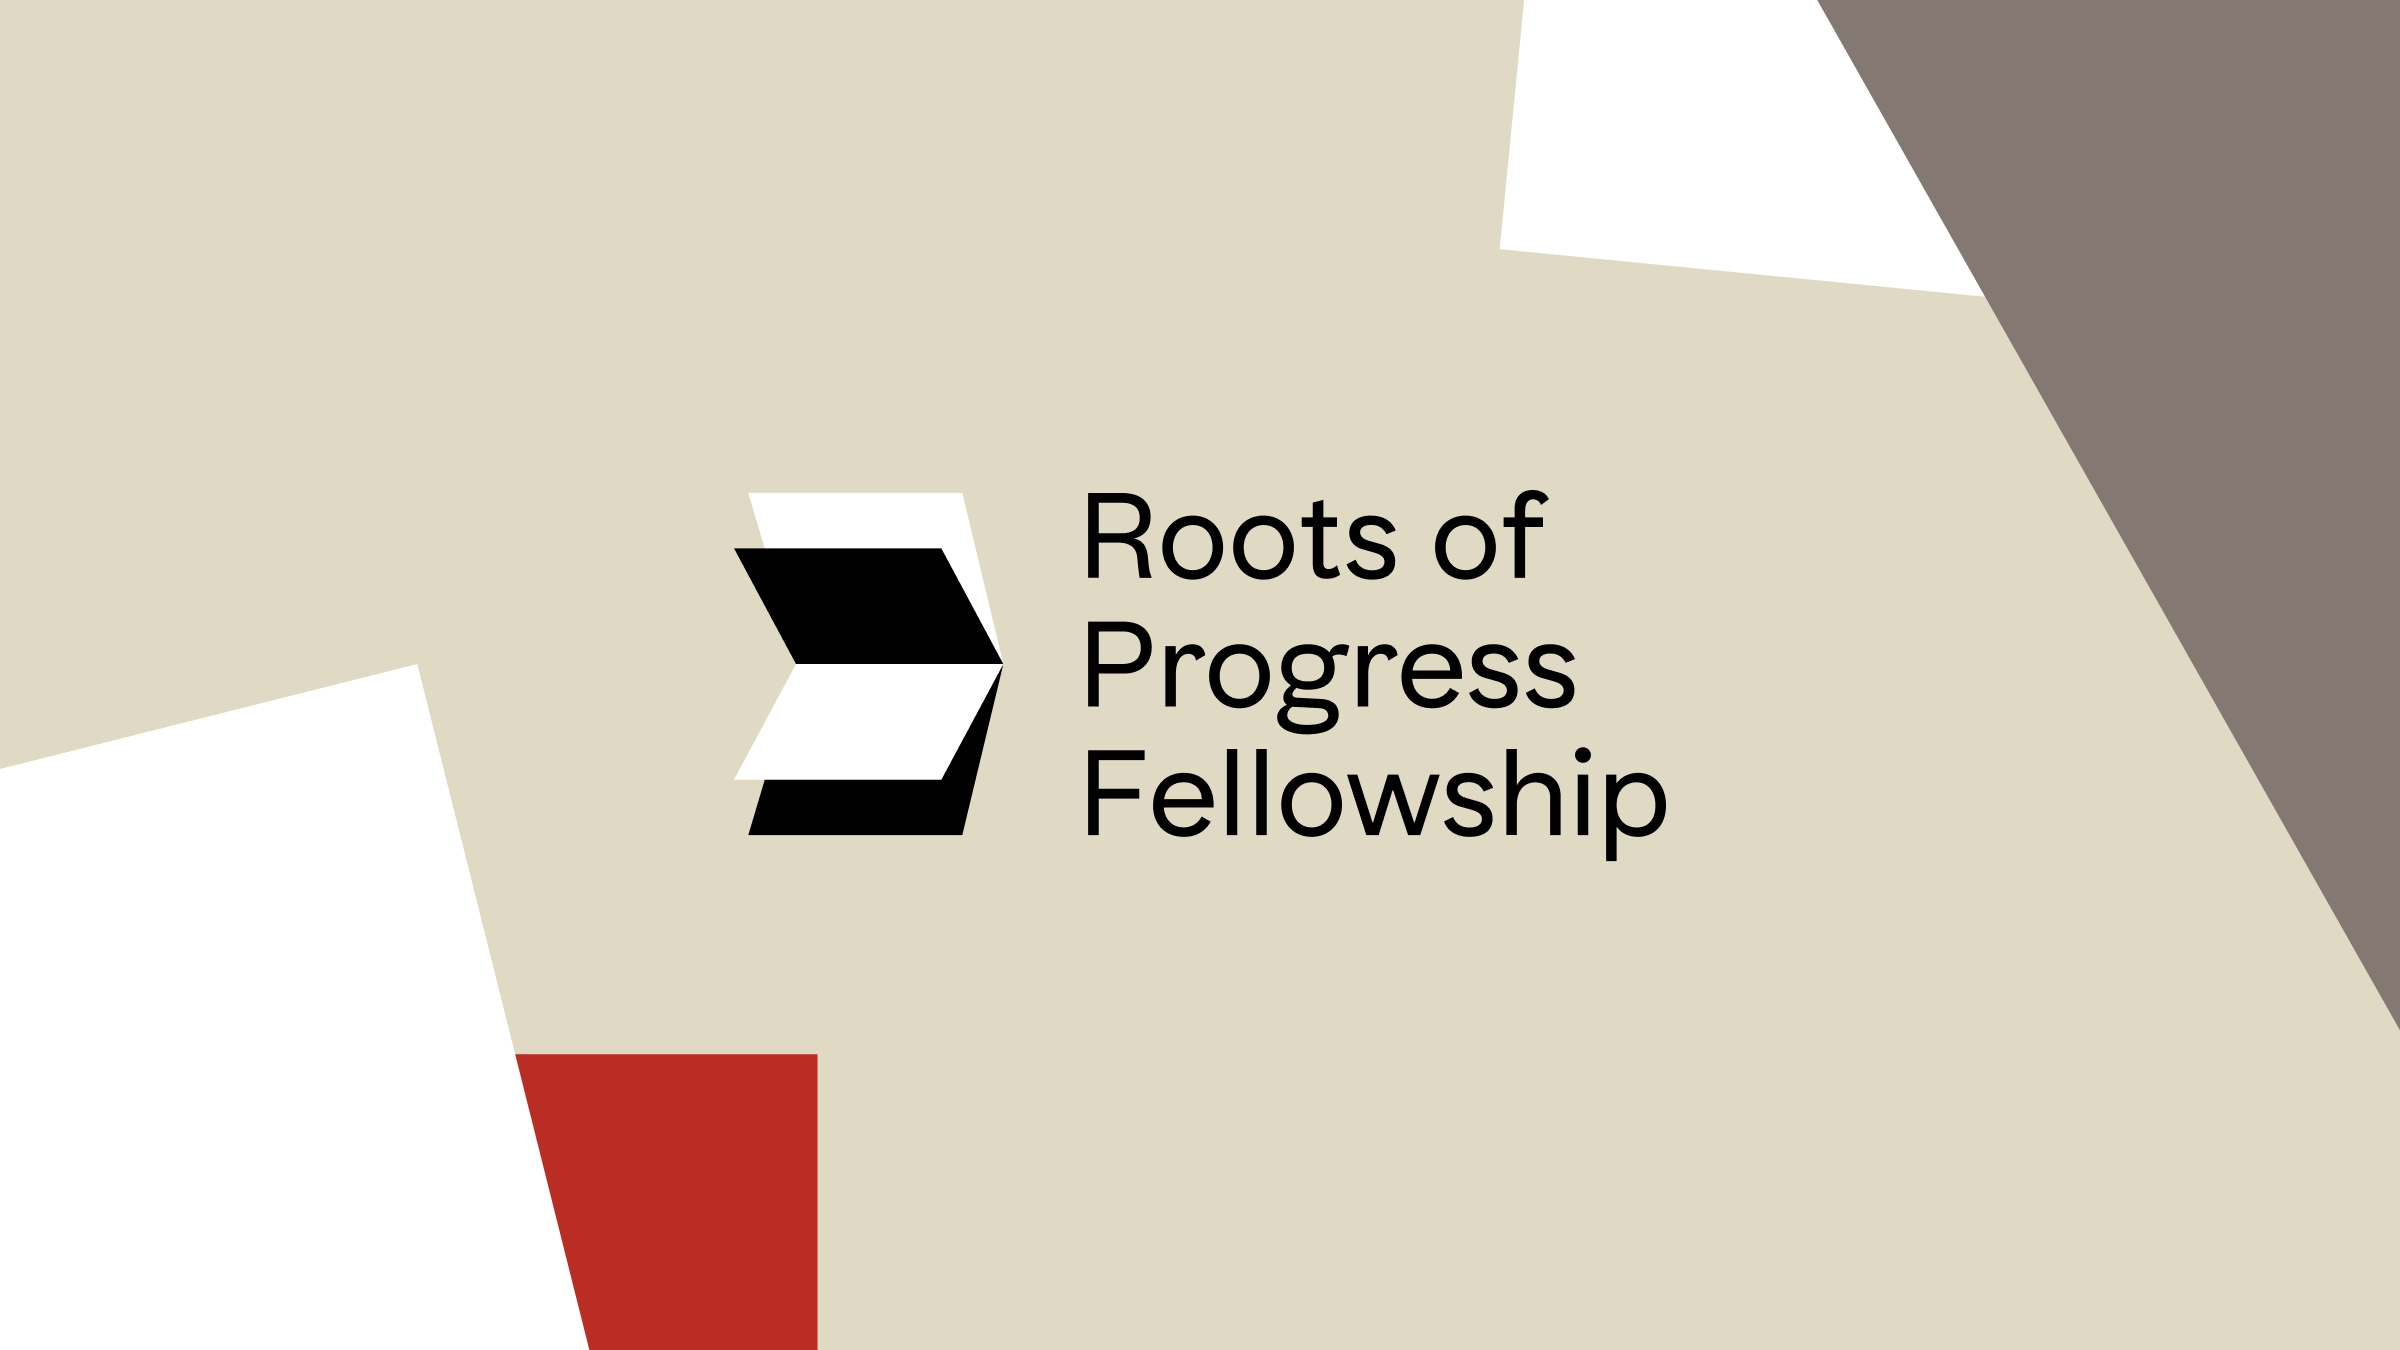 The Roots of Progress Fellowship